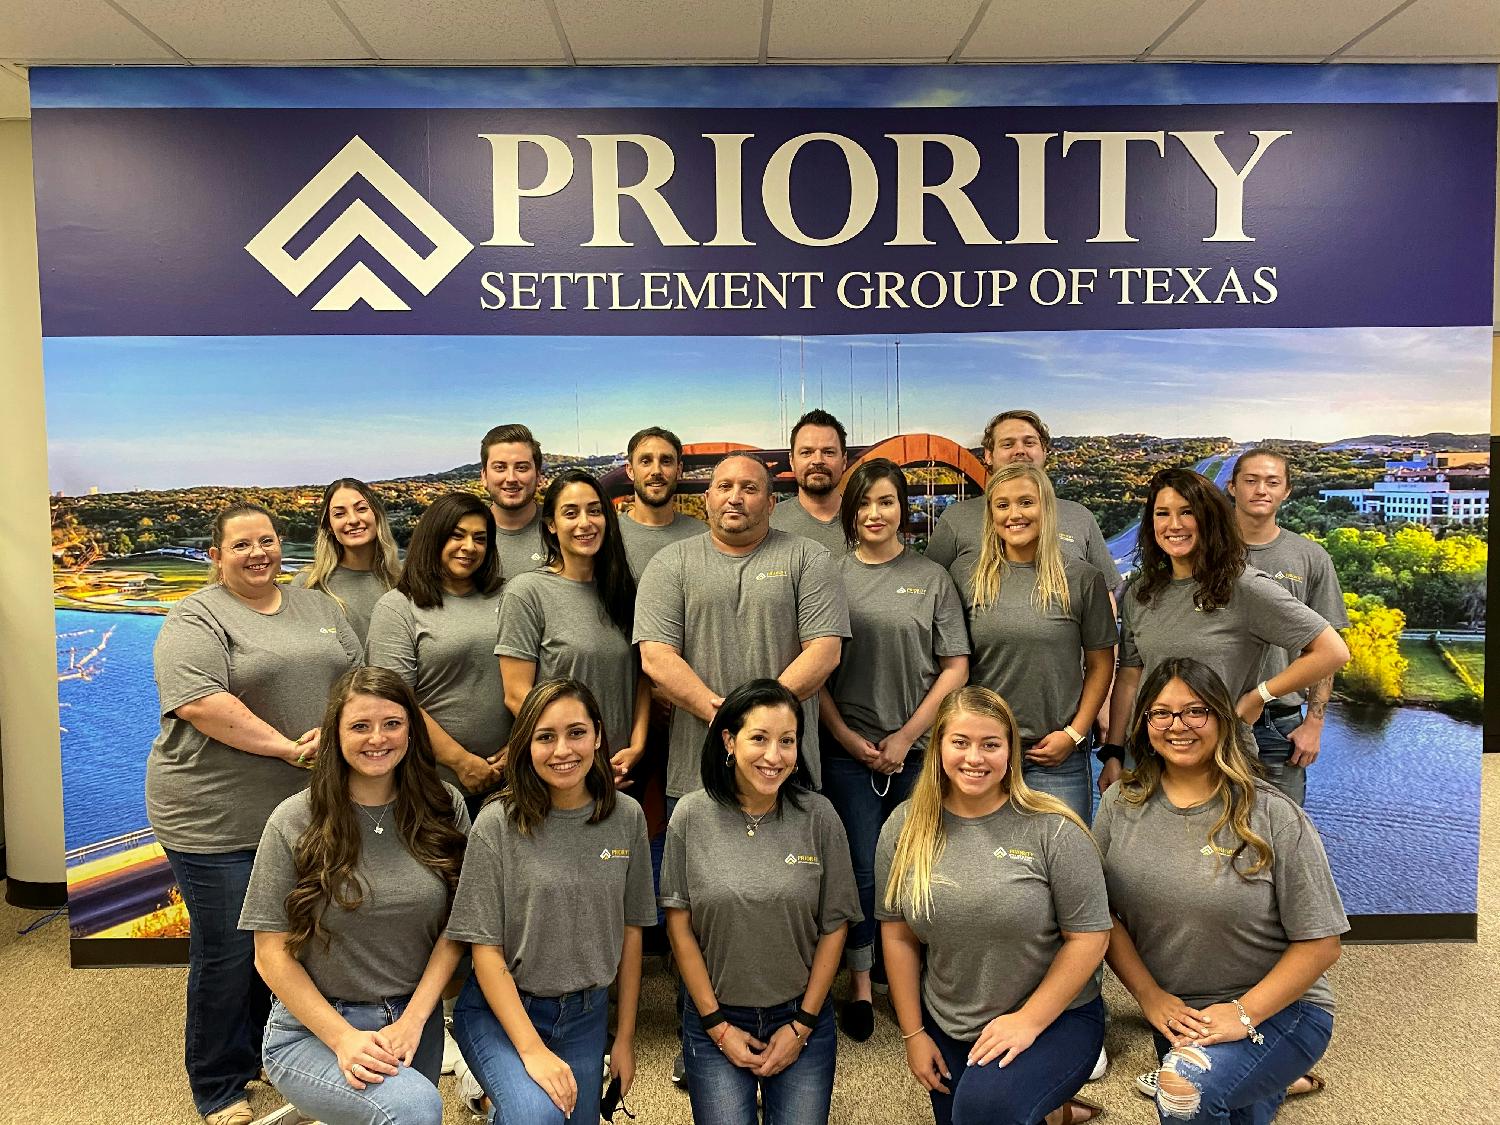 Our employees in Austin, TX taking time for a photo op during the move in to our newest office space.